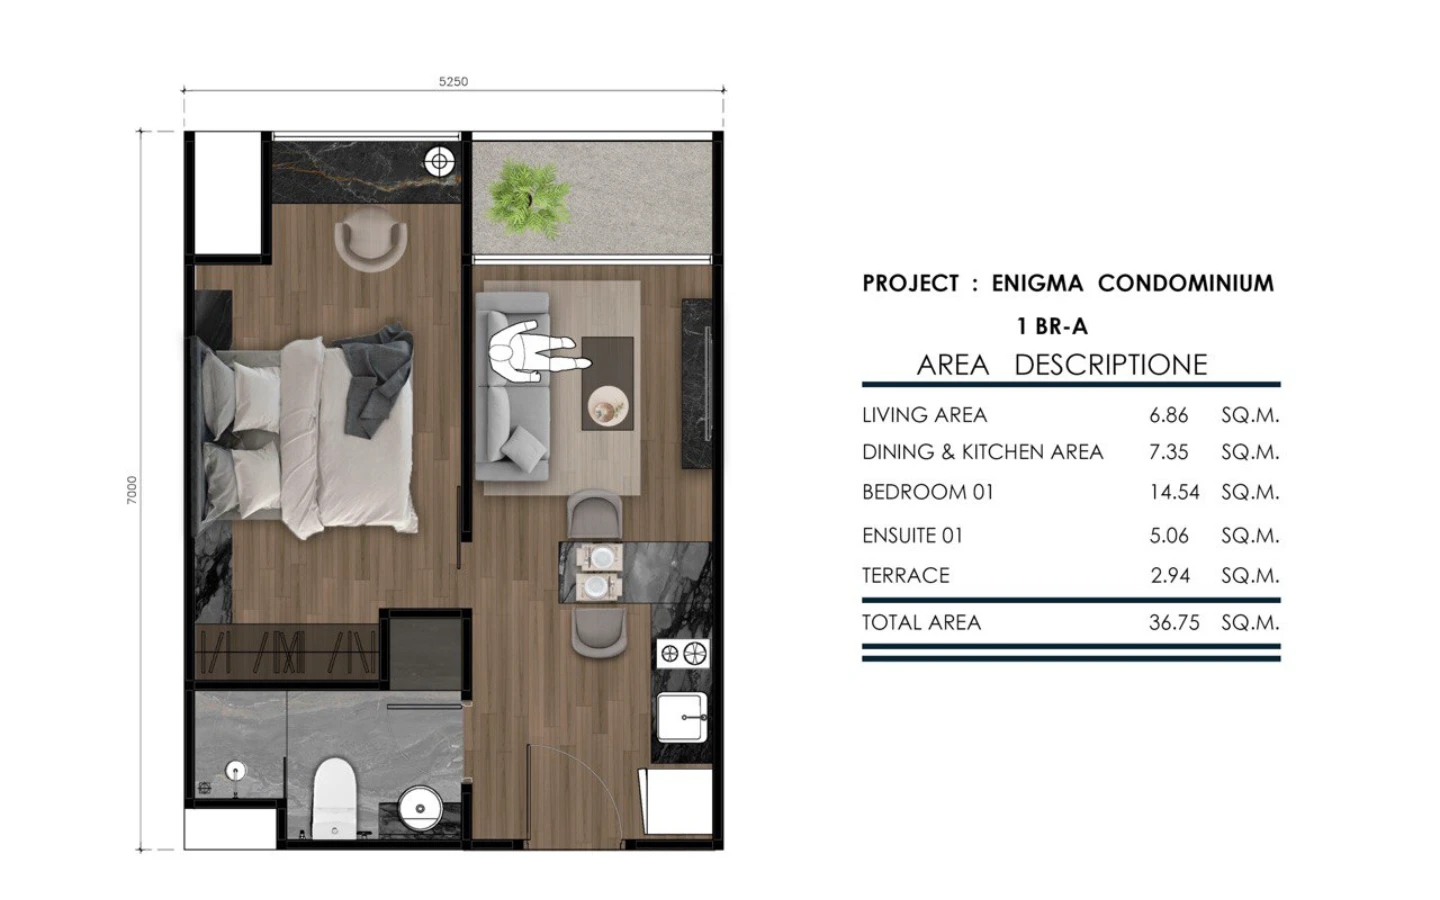 Room Layout